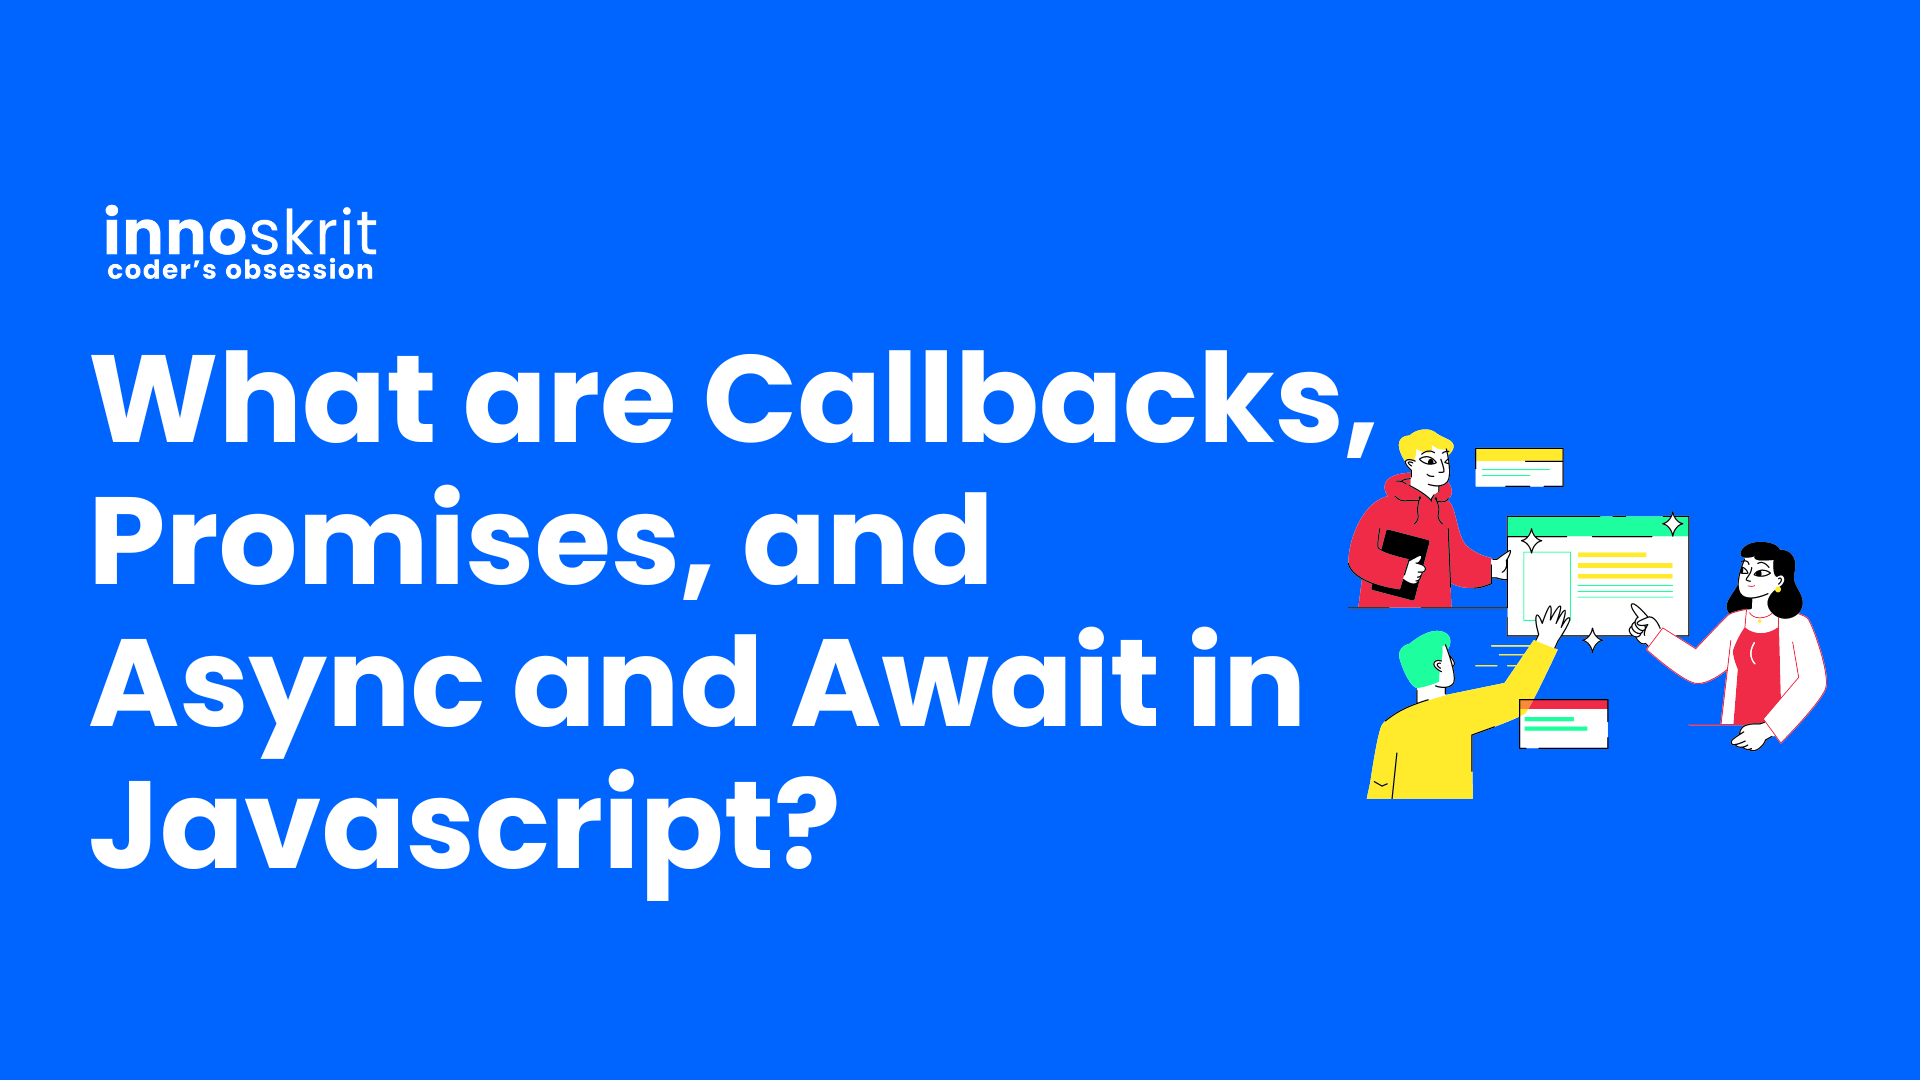 What are Callbacks, Promises, and Async and Await in Javascript?